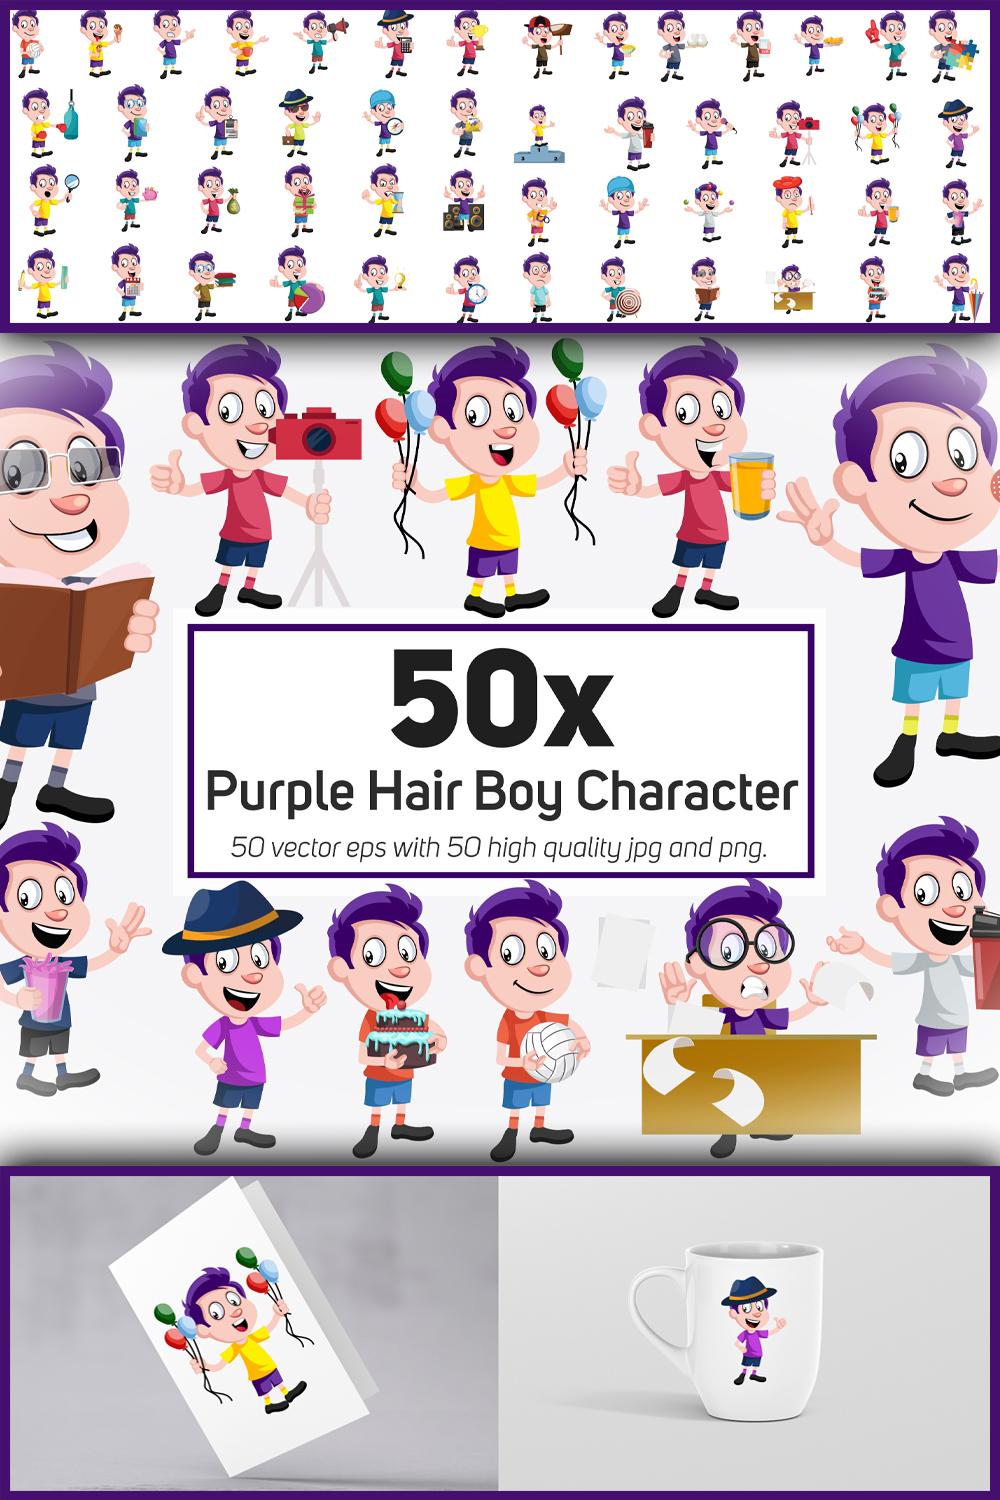 542870 50x purple hair boy character and daily life actio pinterest 1000 1500 843